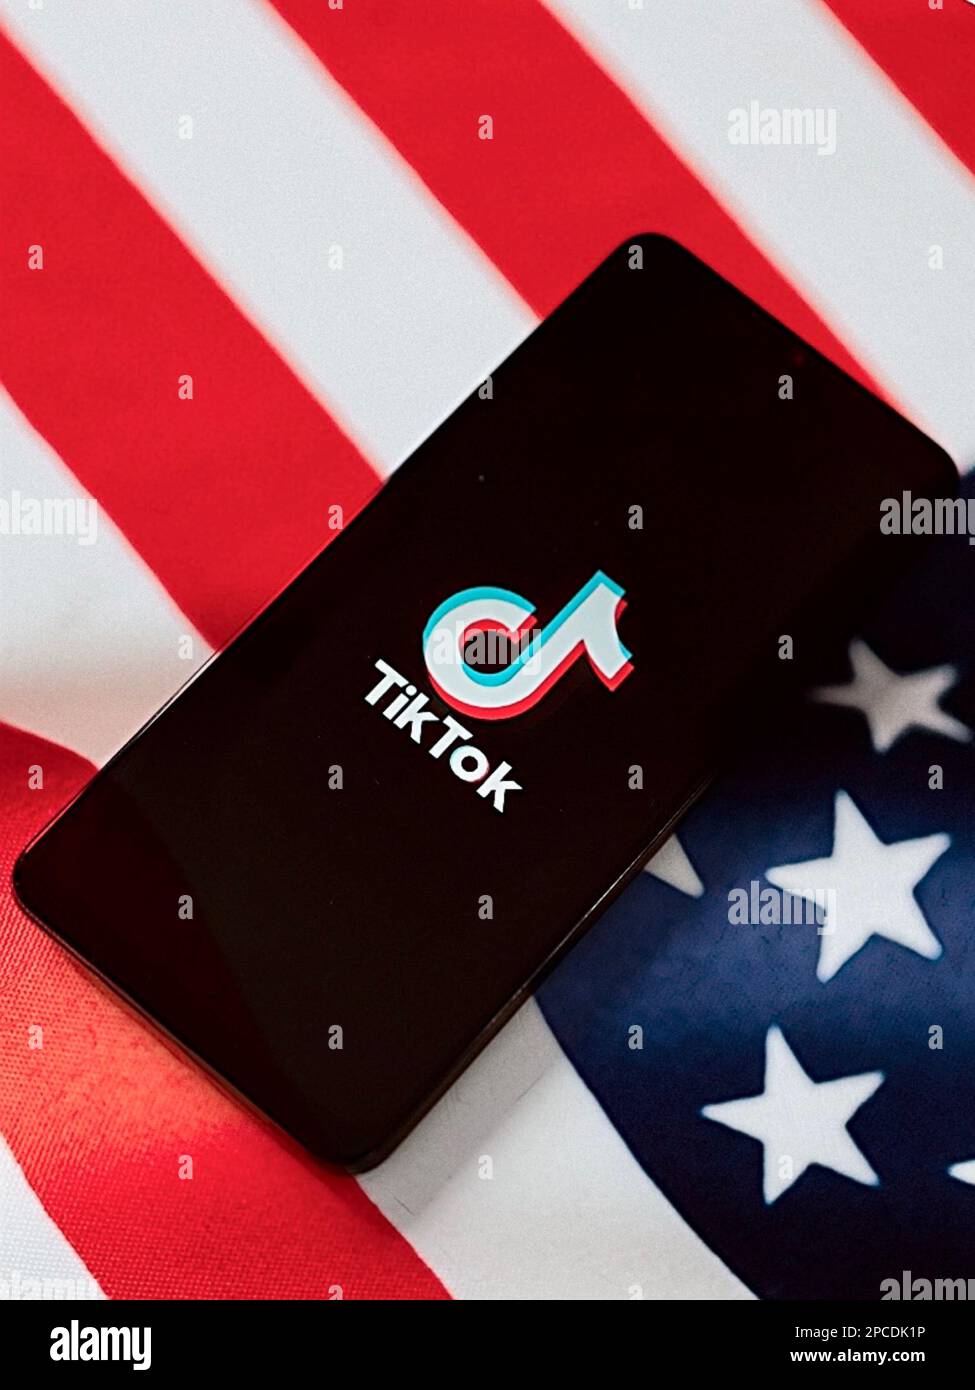 Mobile phone device showing TikTok logo on screen with the American USA flag in the background Stock Photo